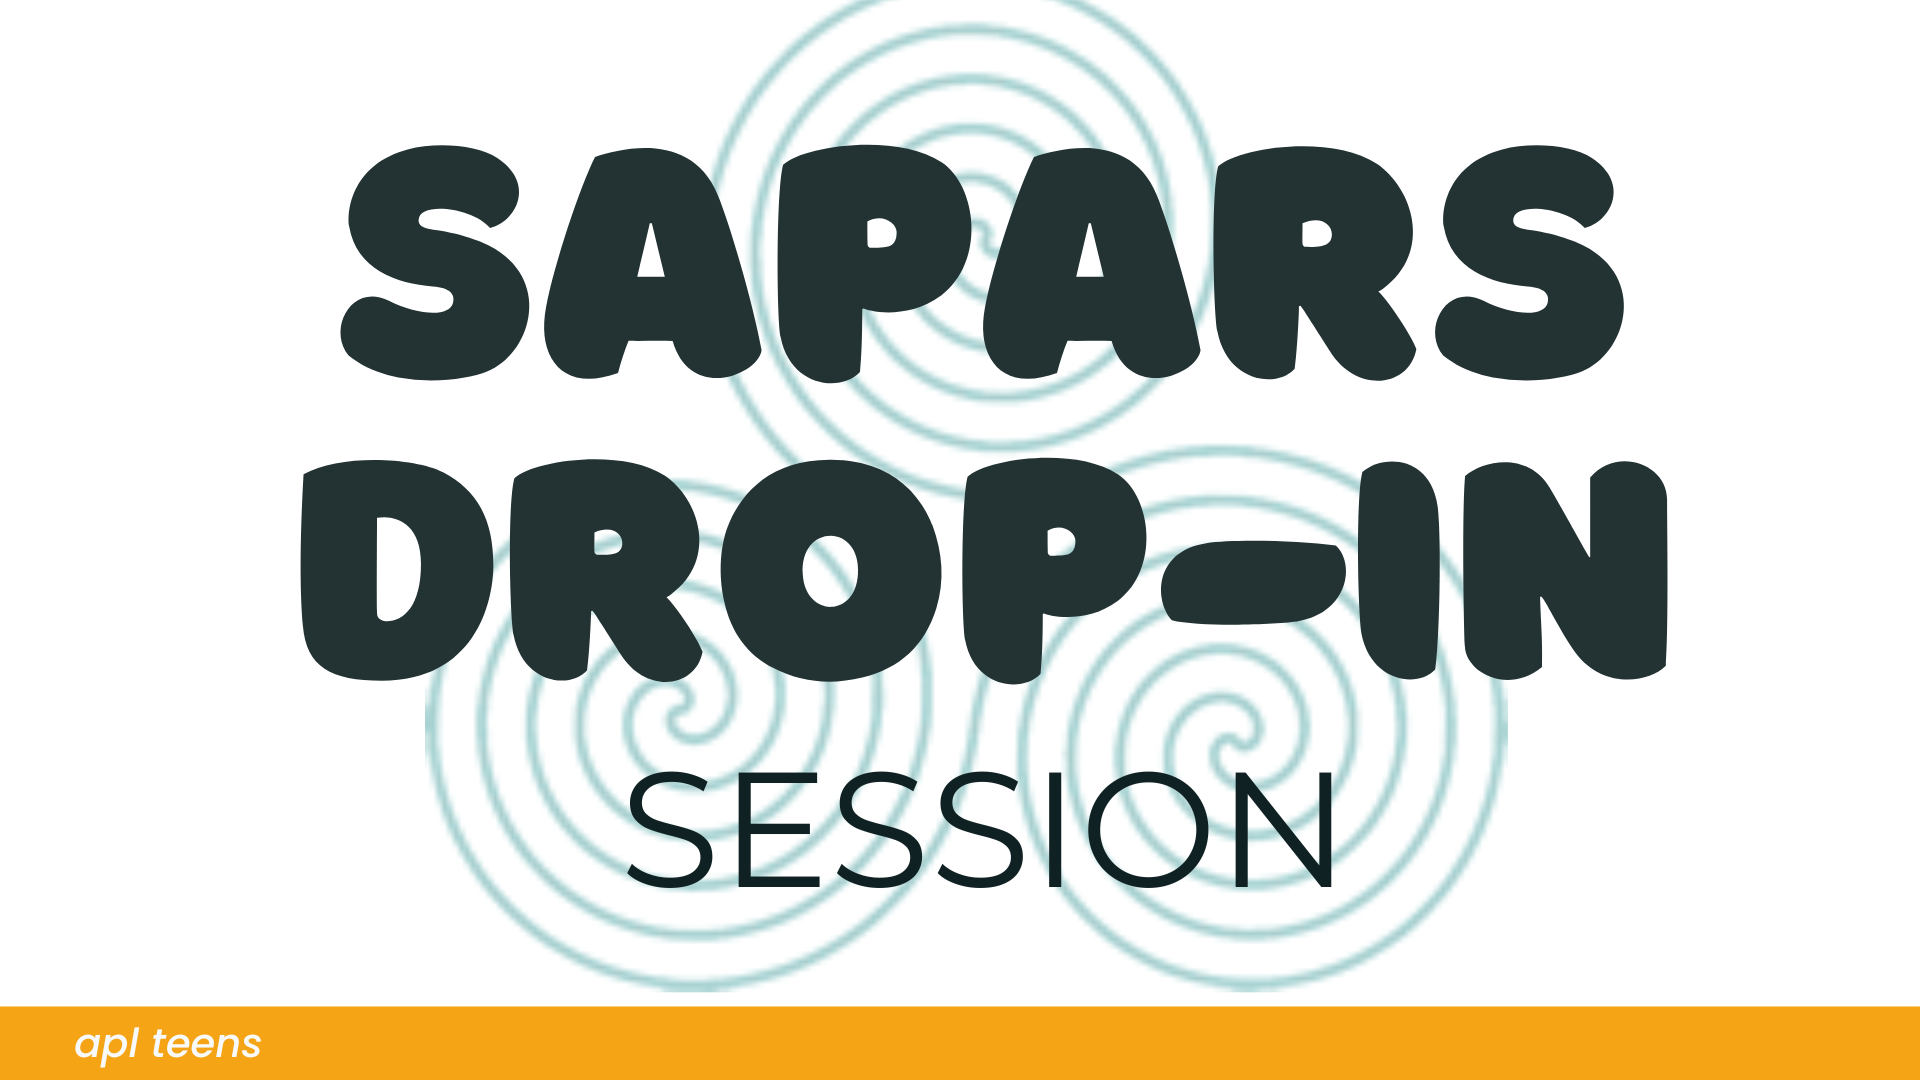 SAPARS drop-in session